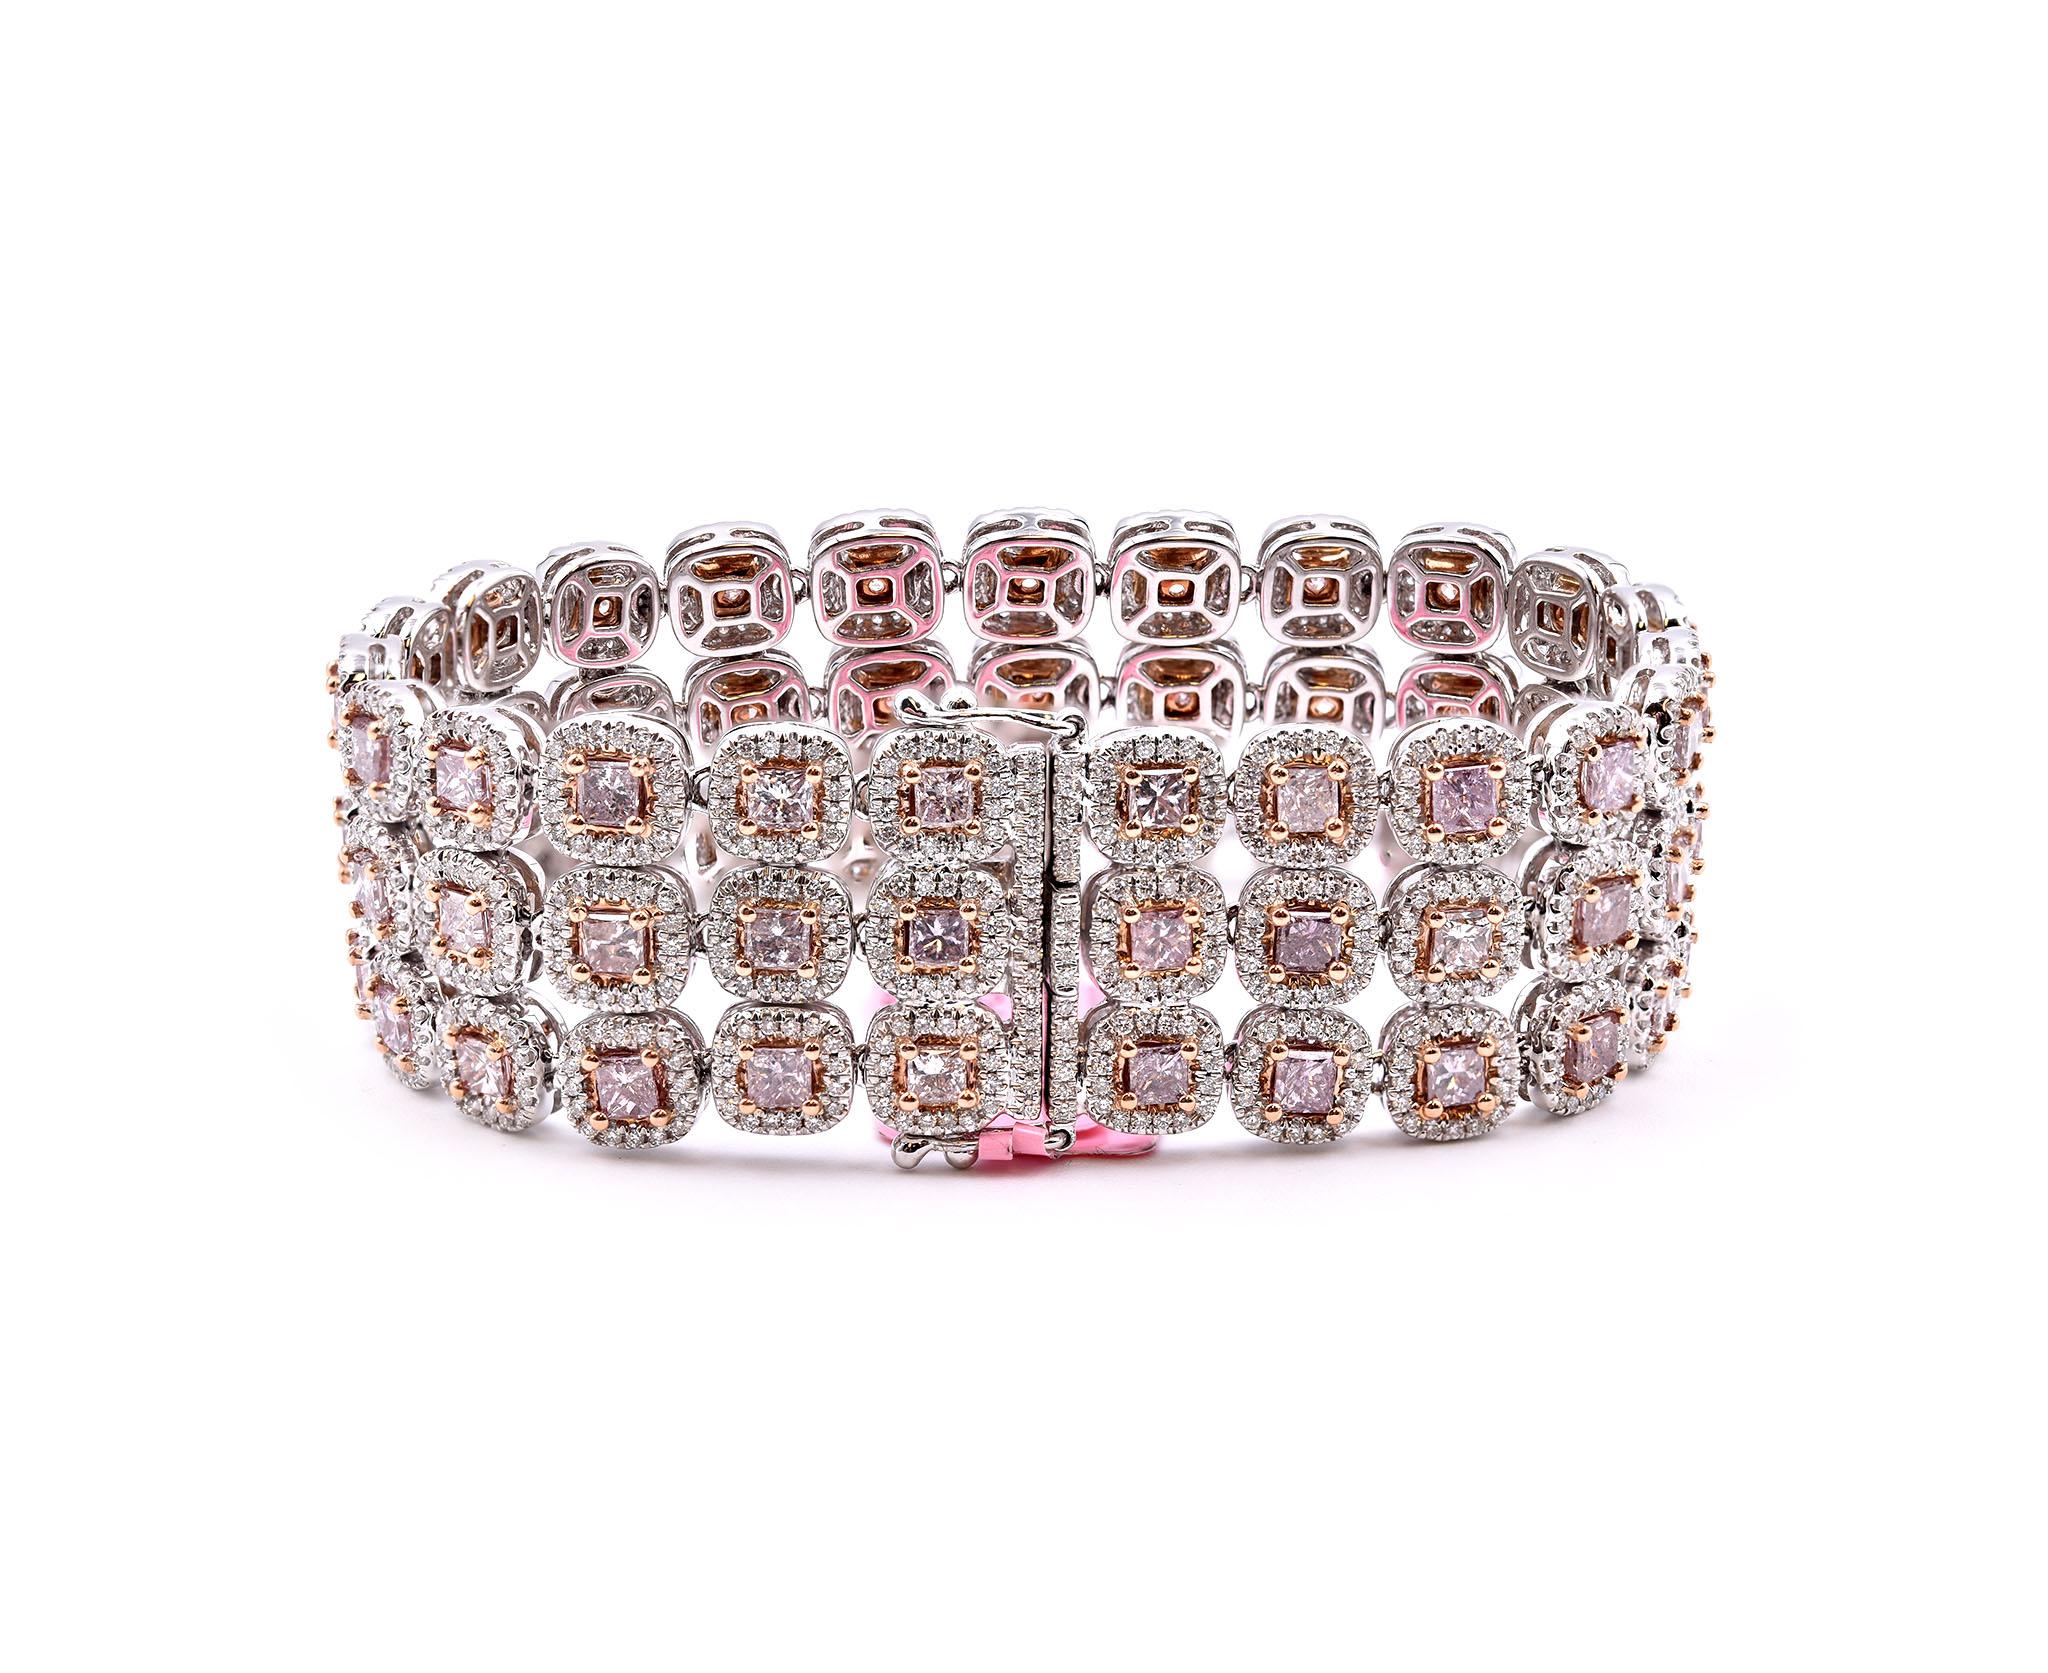 Designer: custom design
Material: 18k white gold
Diamonds: 1210 round brilliant cut = 4.45cttw 
Color: G
Clarity: VS1
Pink Diamonds: 69 round brilliant cut = 71.15cttw
Color: pink
Dimensions: bracelet is will fit up to a 7-inch wrist and it is